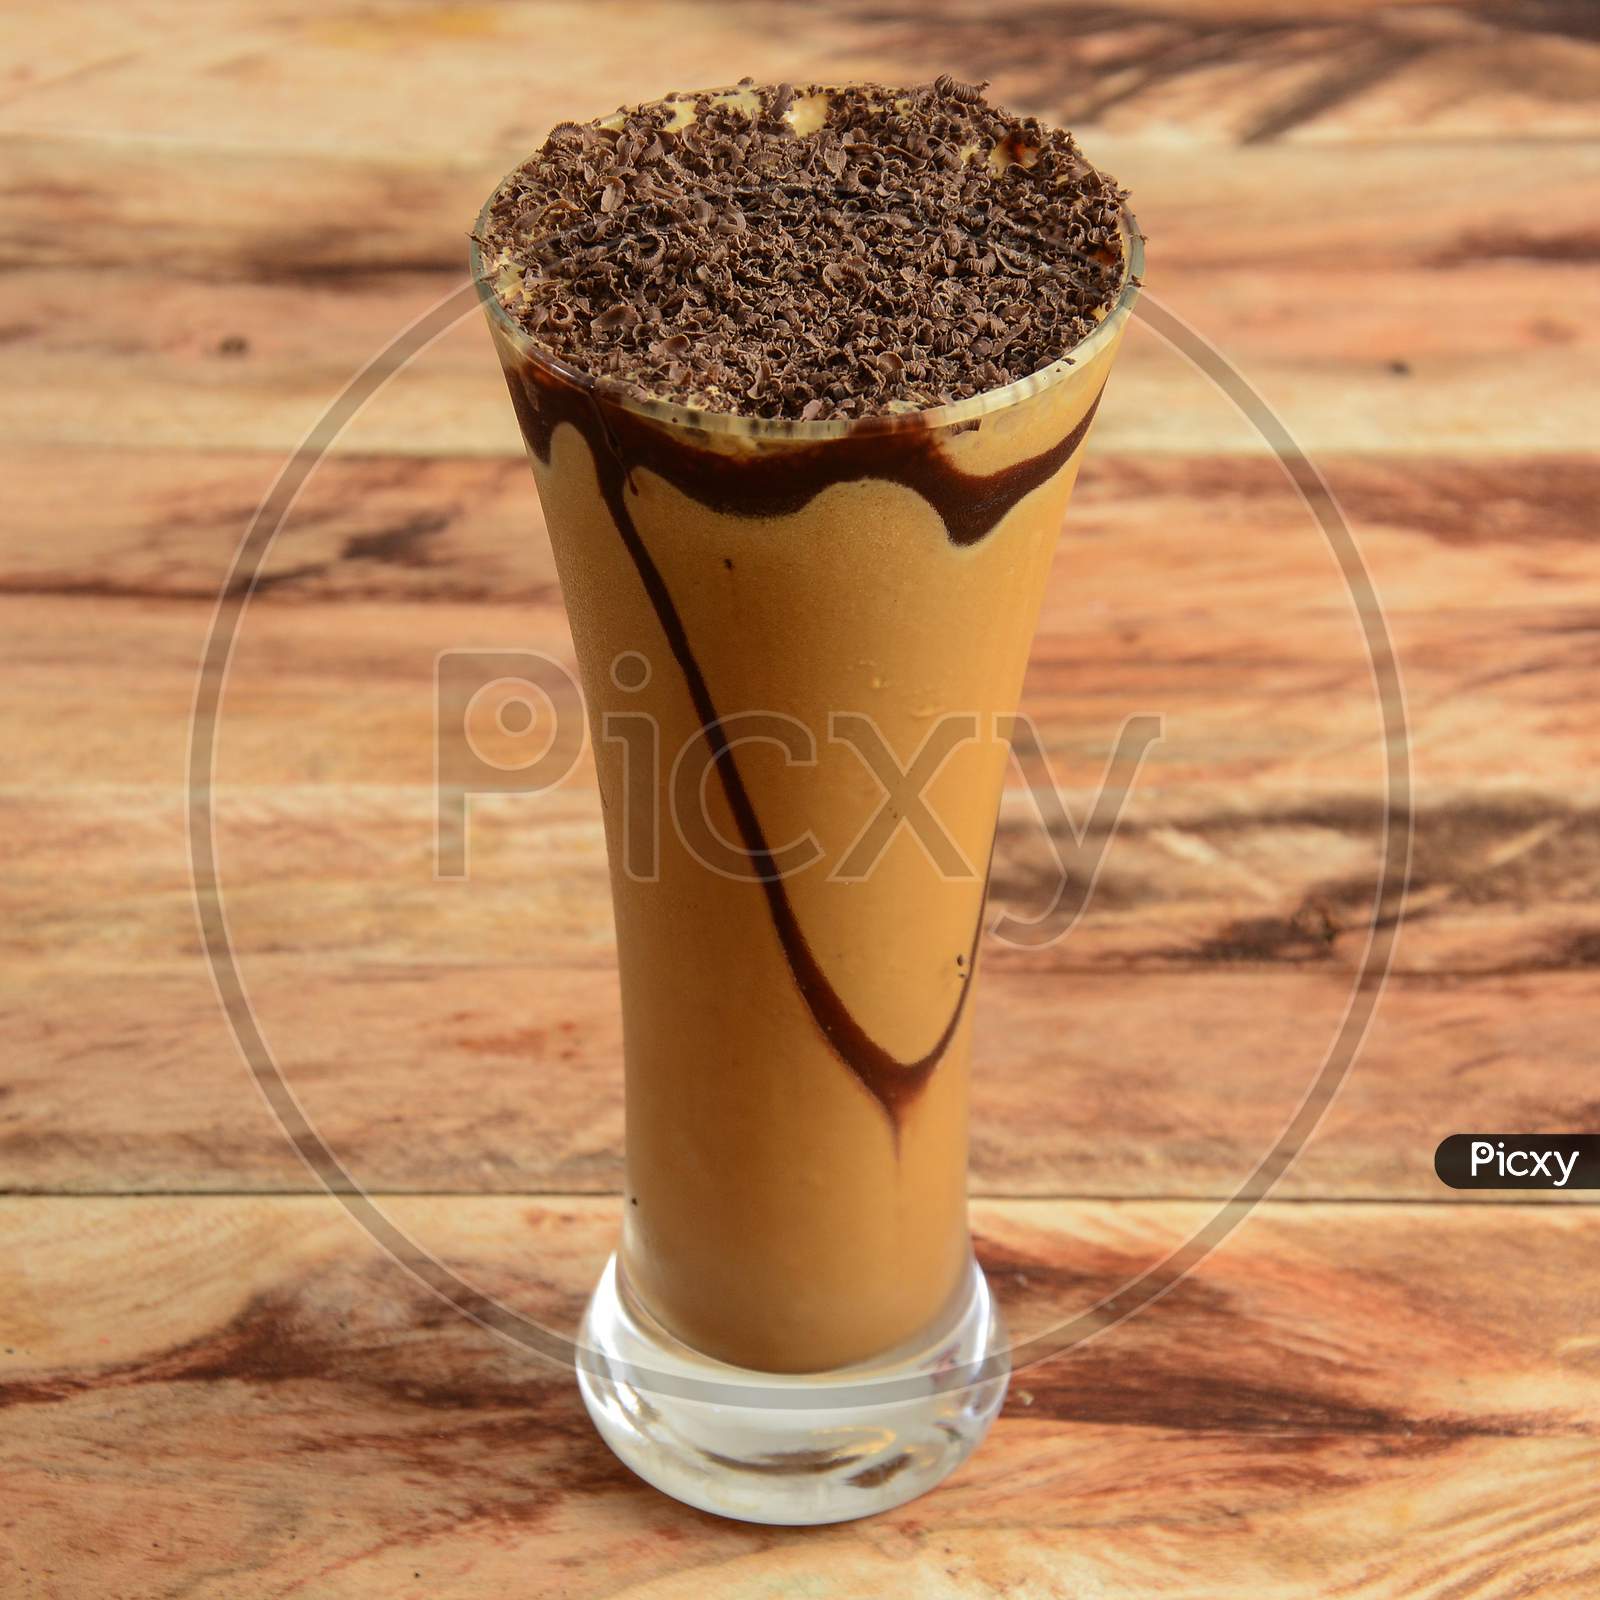 Chocolate Cold Coffee Served In A Glass Over A Rustic Wooden Background,A Refreshing Drink For Summer Days, Selective Focus On Top